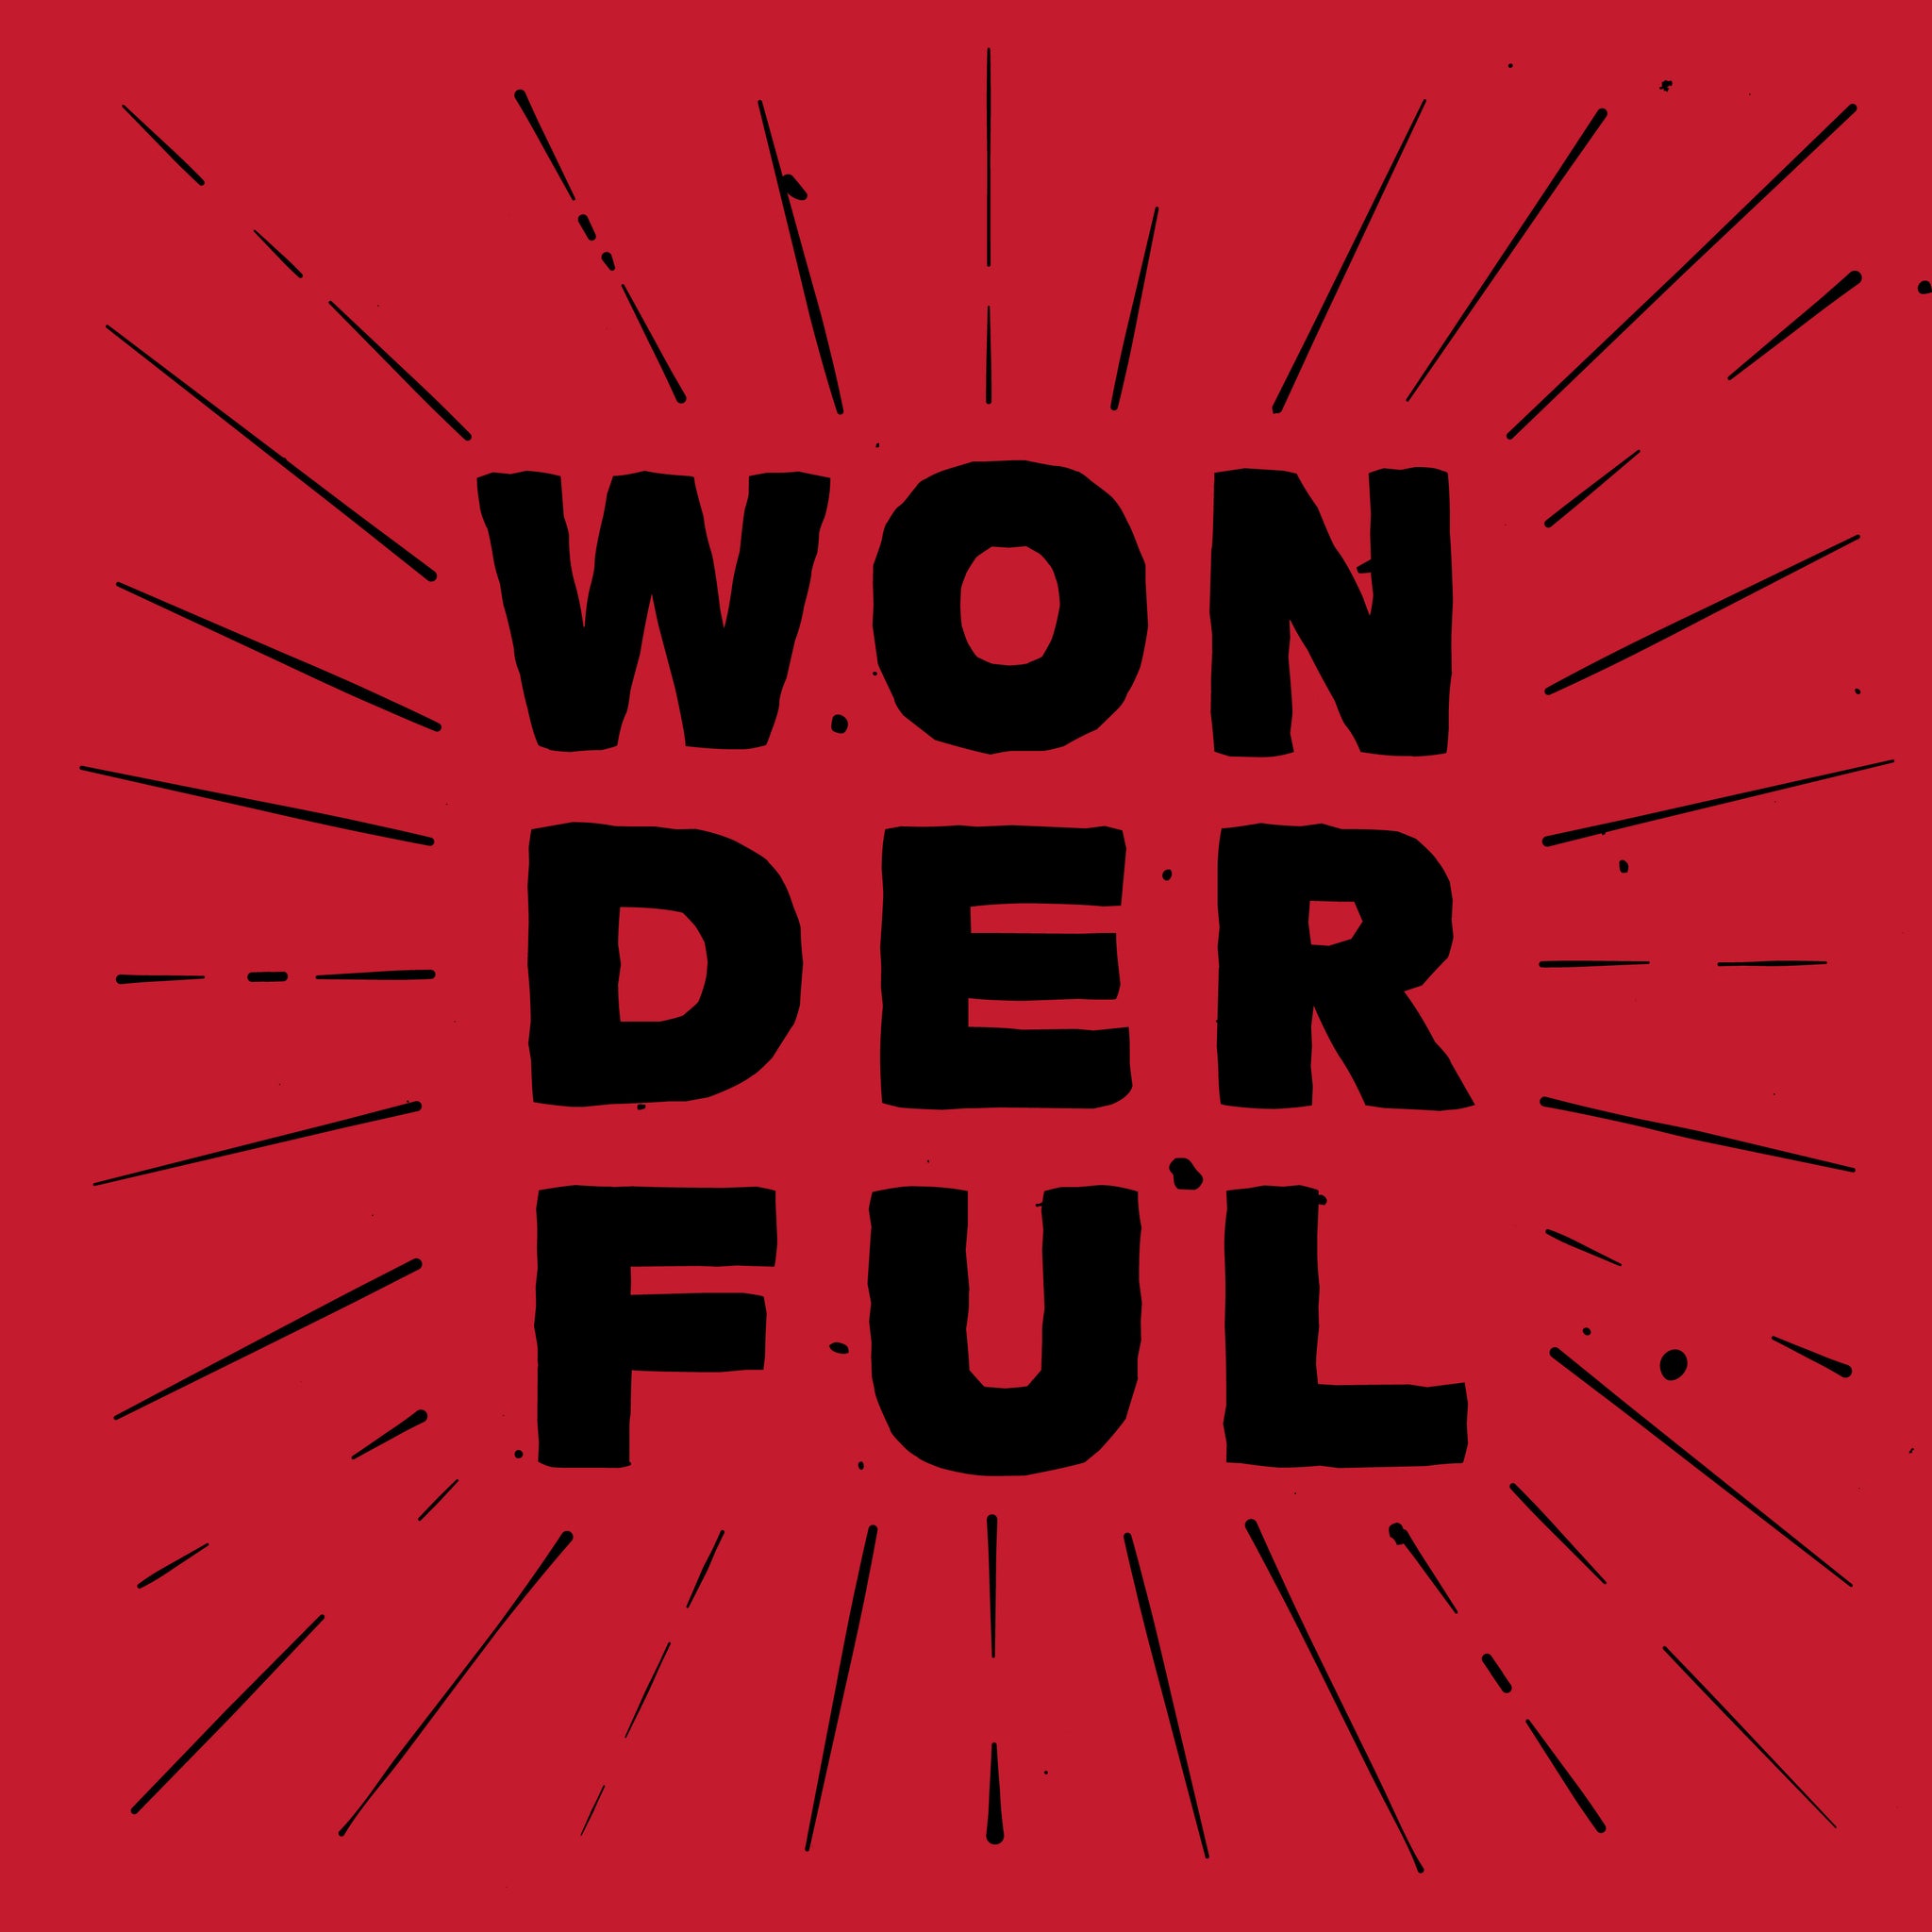 the word wonderful in black text and a sunburst on a red background